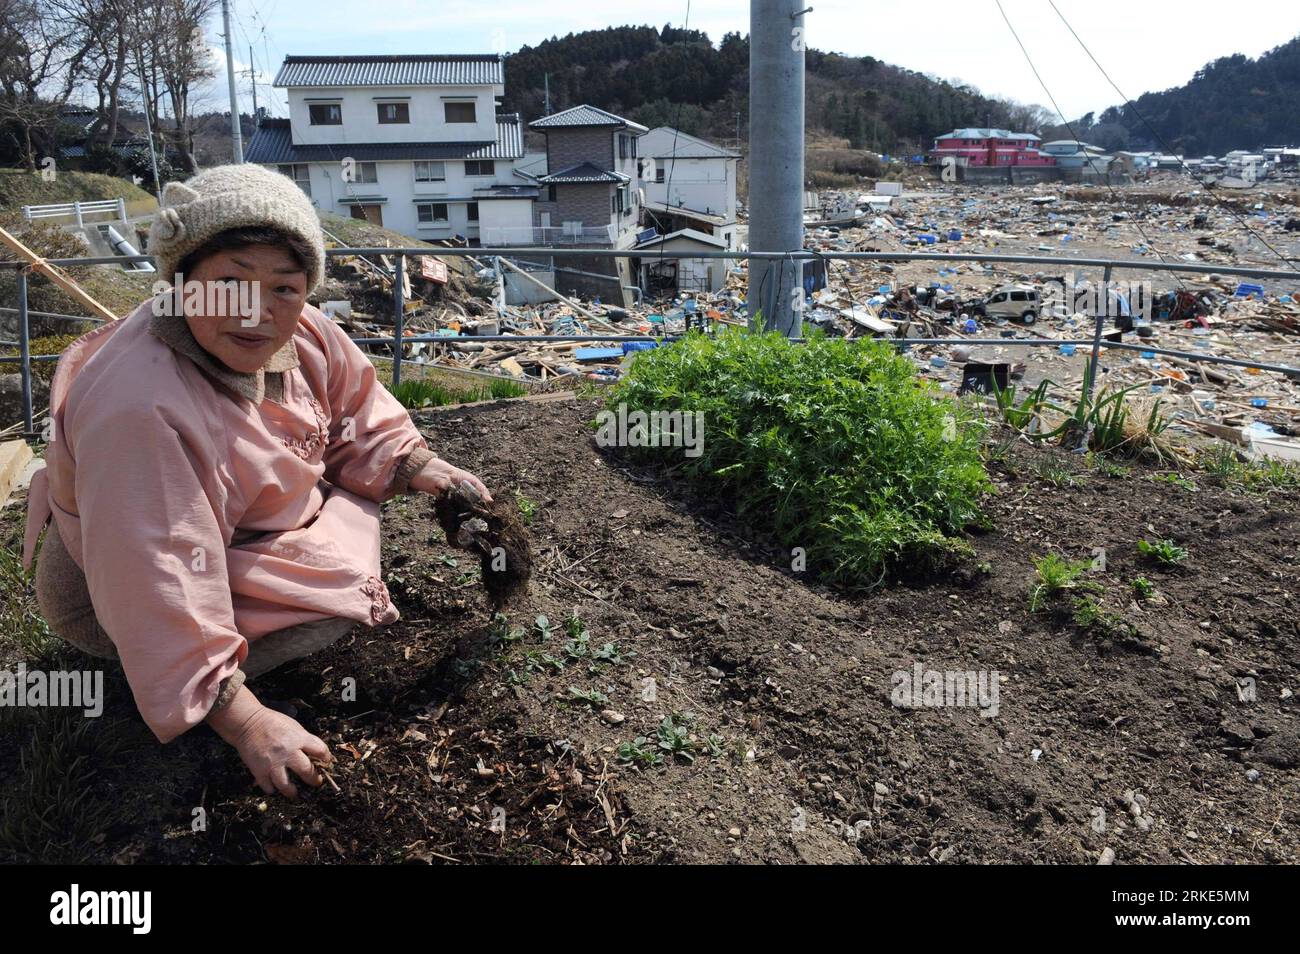 Bildnummer: 55055321  Datum: 23.03.2011  Copyright: imago/Xinhua (110323) -- MIYAGI, March 23, 2011 (Xinhua) -- Tamie Suda, 62, weeds in her garden in Oshikacho of Miyagi prefecture, Japan, March 23, 2011. The Suda family survived from the quake-tsunami, but lost the source of income as the family hotel they run was destroyed. The family members began to rebuild houses although the water, gas and power supplies were cut off at present. (Xinhua/Song Zhenping) (lyi) JAPAN-MIYAGI-DAILY LIFE PUBLICATIONxNOTxINxCHN Gesellschaft Japan Naturkatastrophe Erdbeben Tsunami Schäden Alltag Land Leute Fotos Stock Photo